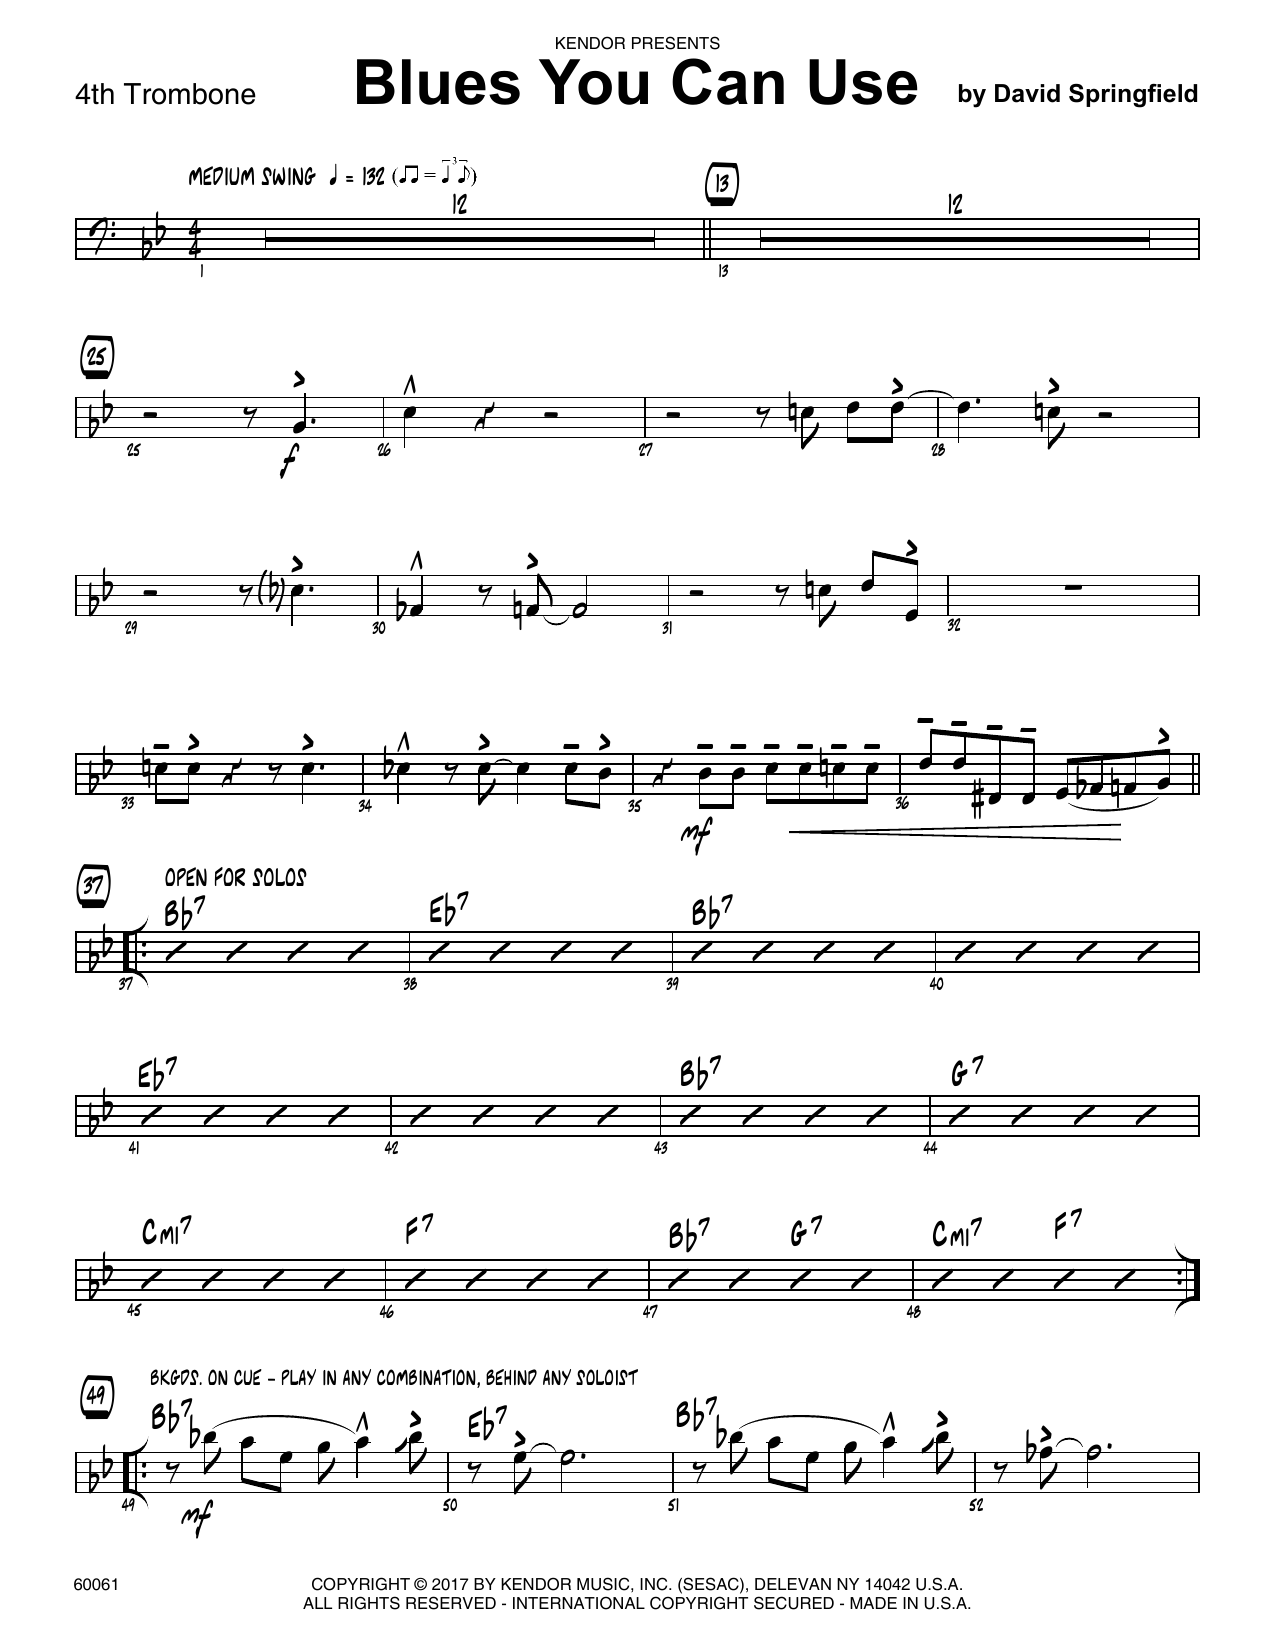 Download David Springfield Blues You Can Use - 4th Trombone sheet music and printable PDF score & Jazz music notes